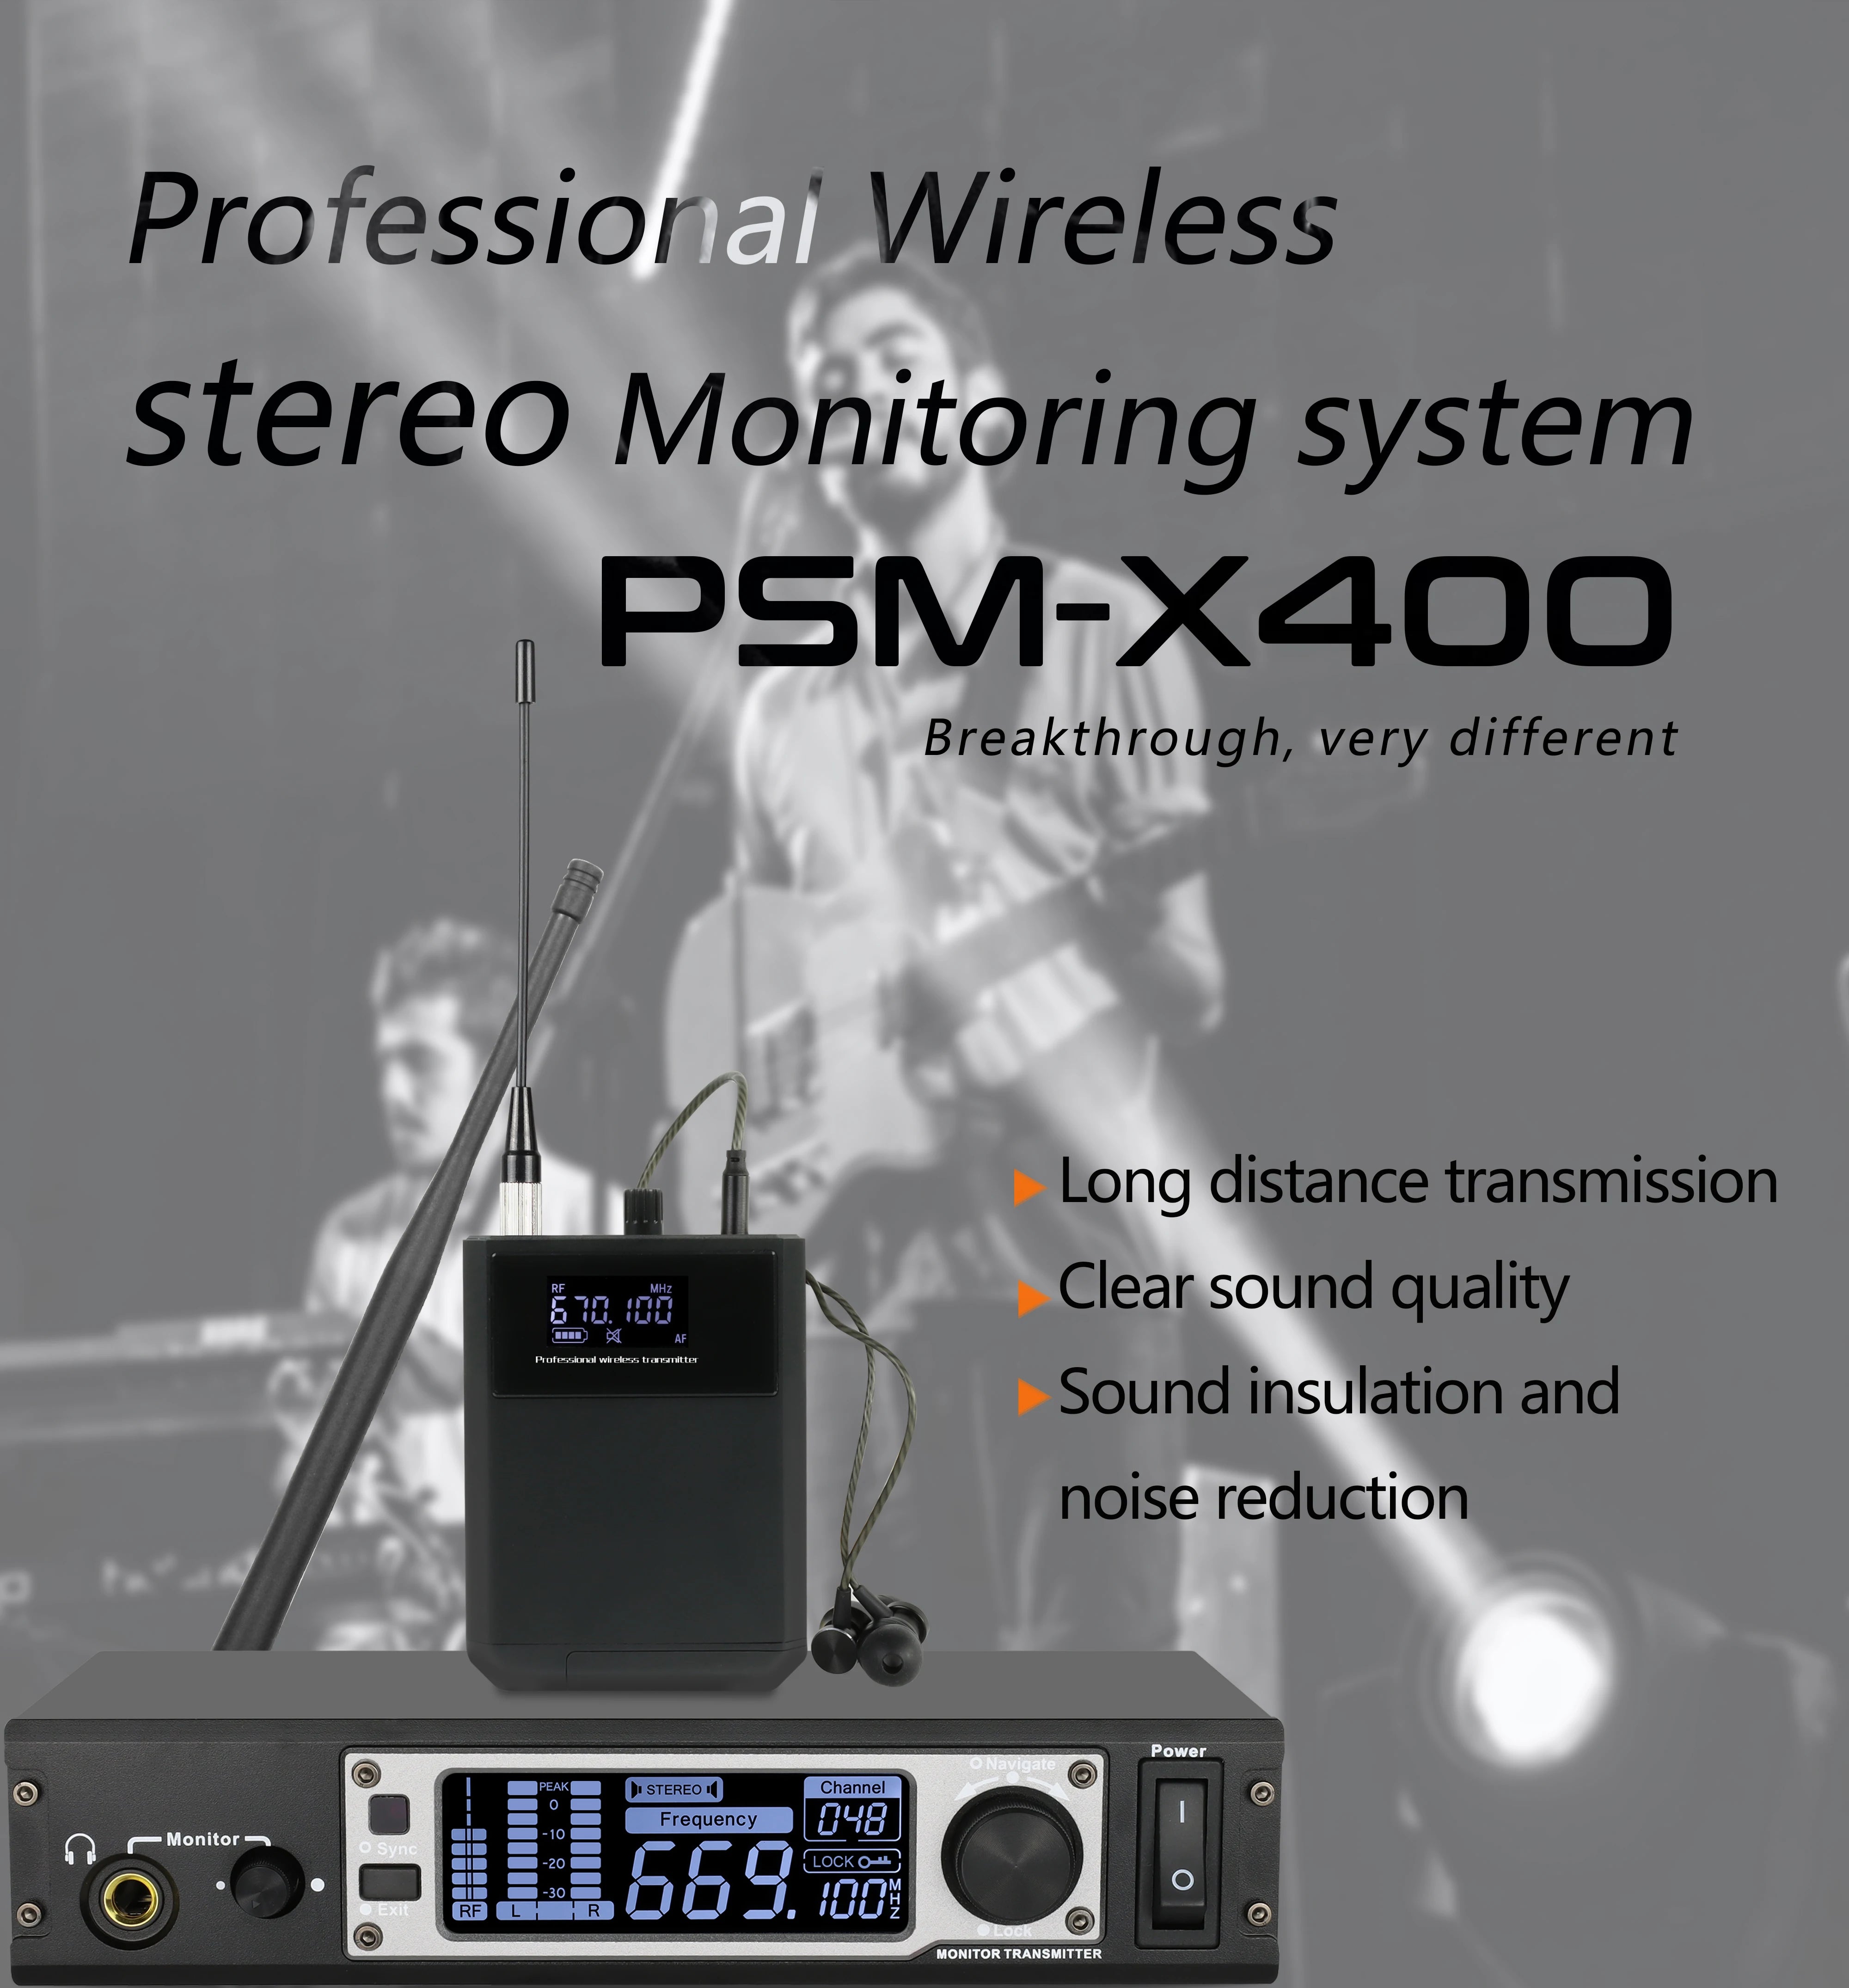 HONGUAN Stereo PSM-X400, Professionai Wireless stereo Monitoring system PSM-X4O0 Breakthrough, very